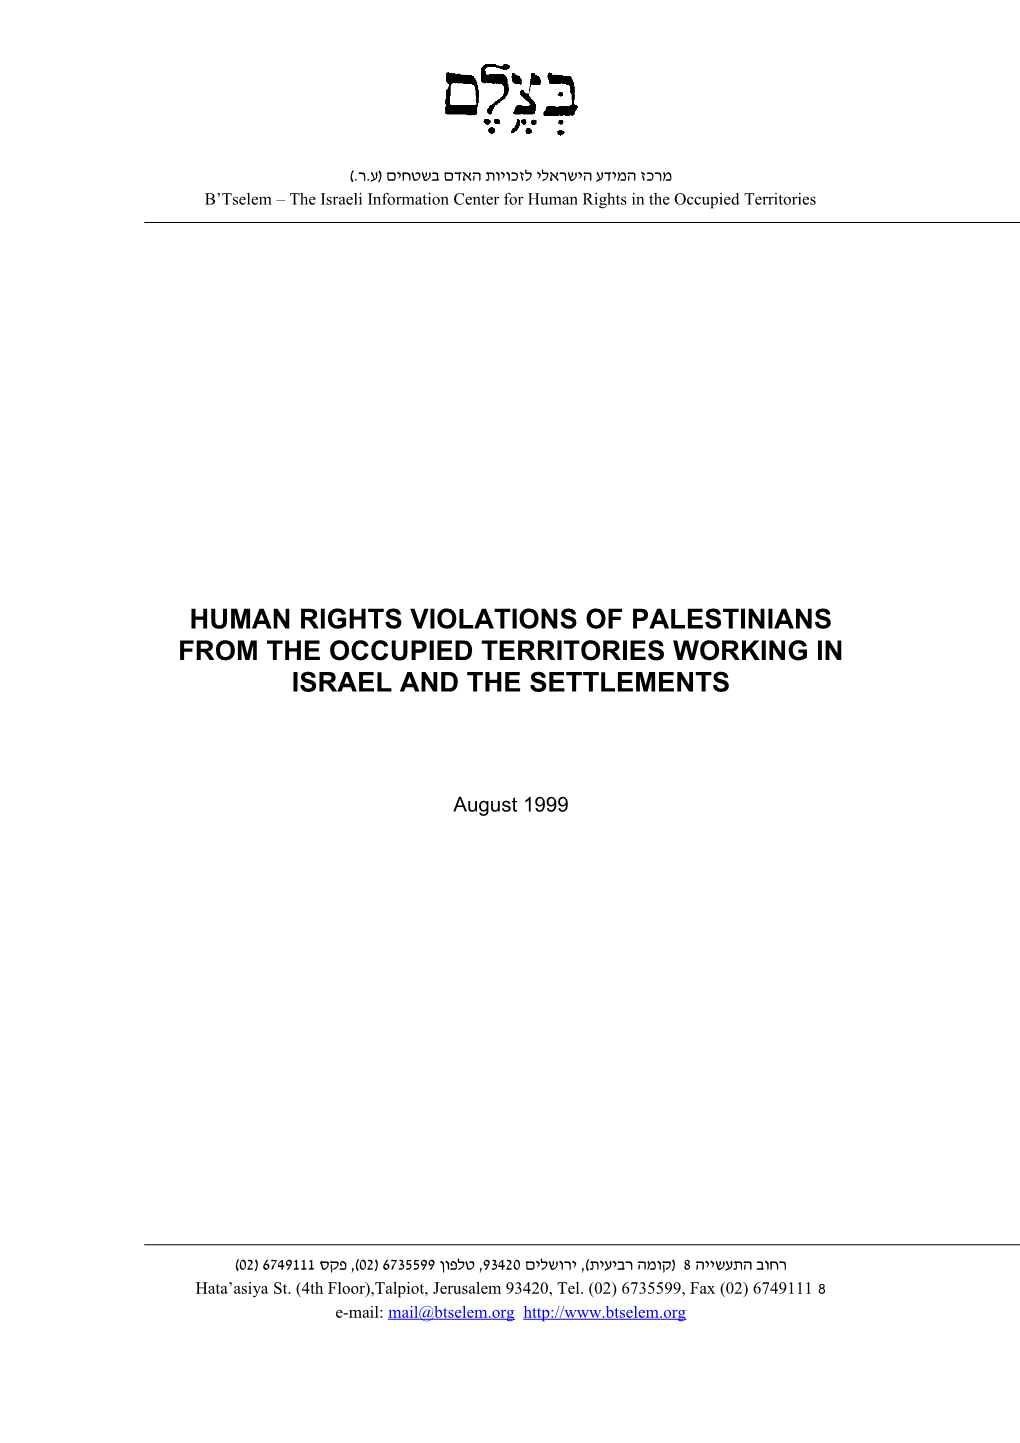 B'tselem Report: Human Rights Violations of Palestinians from the Occupied Territories